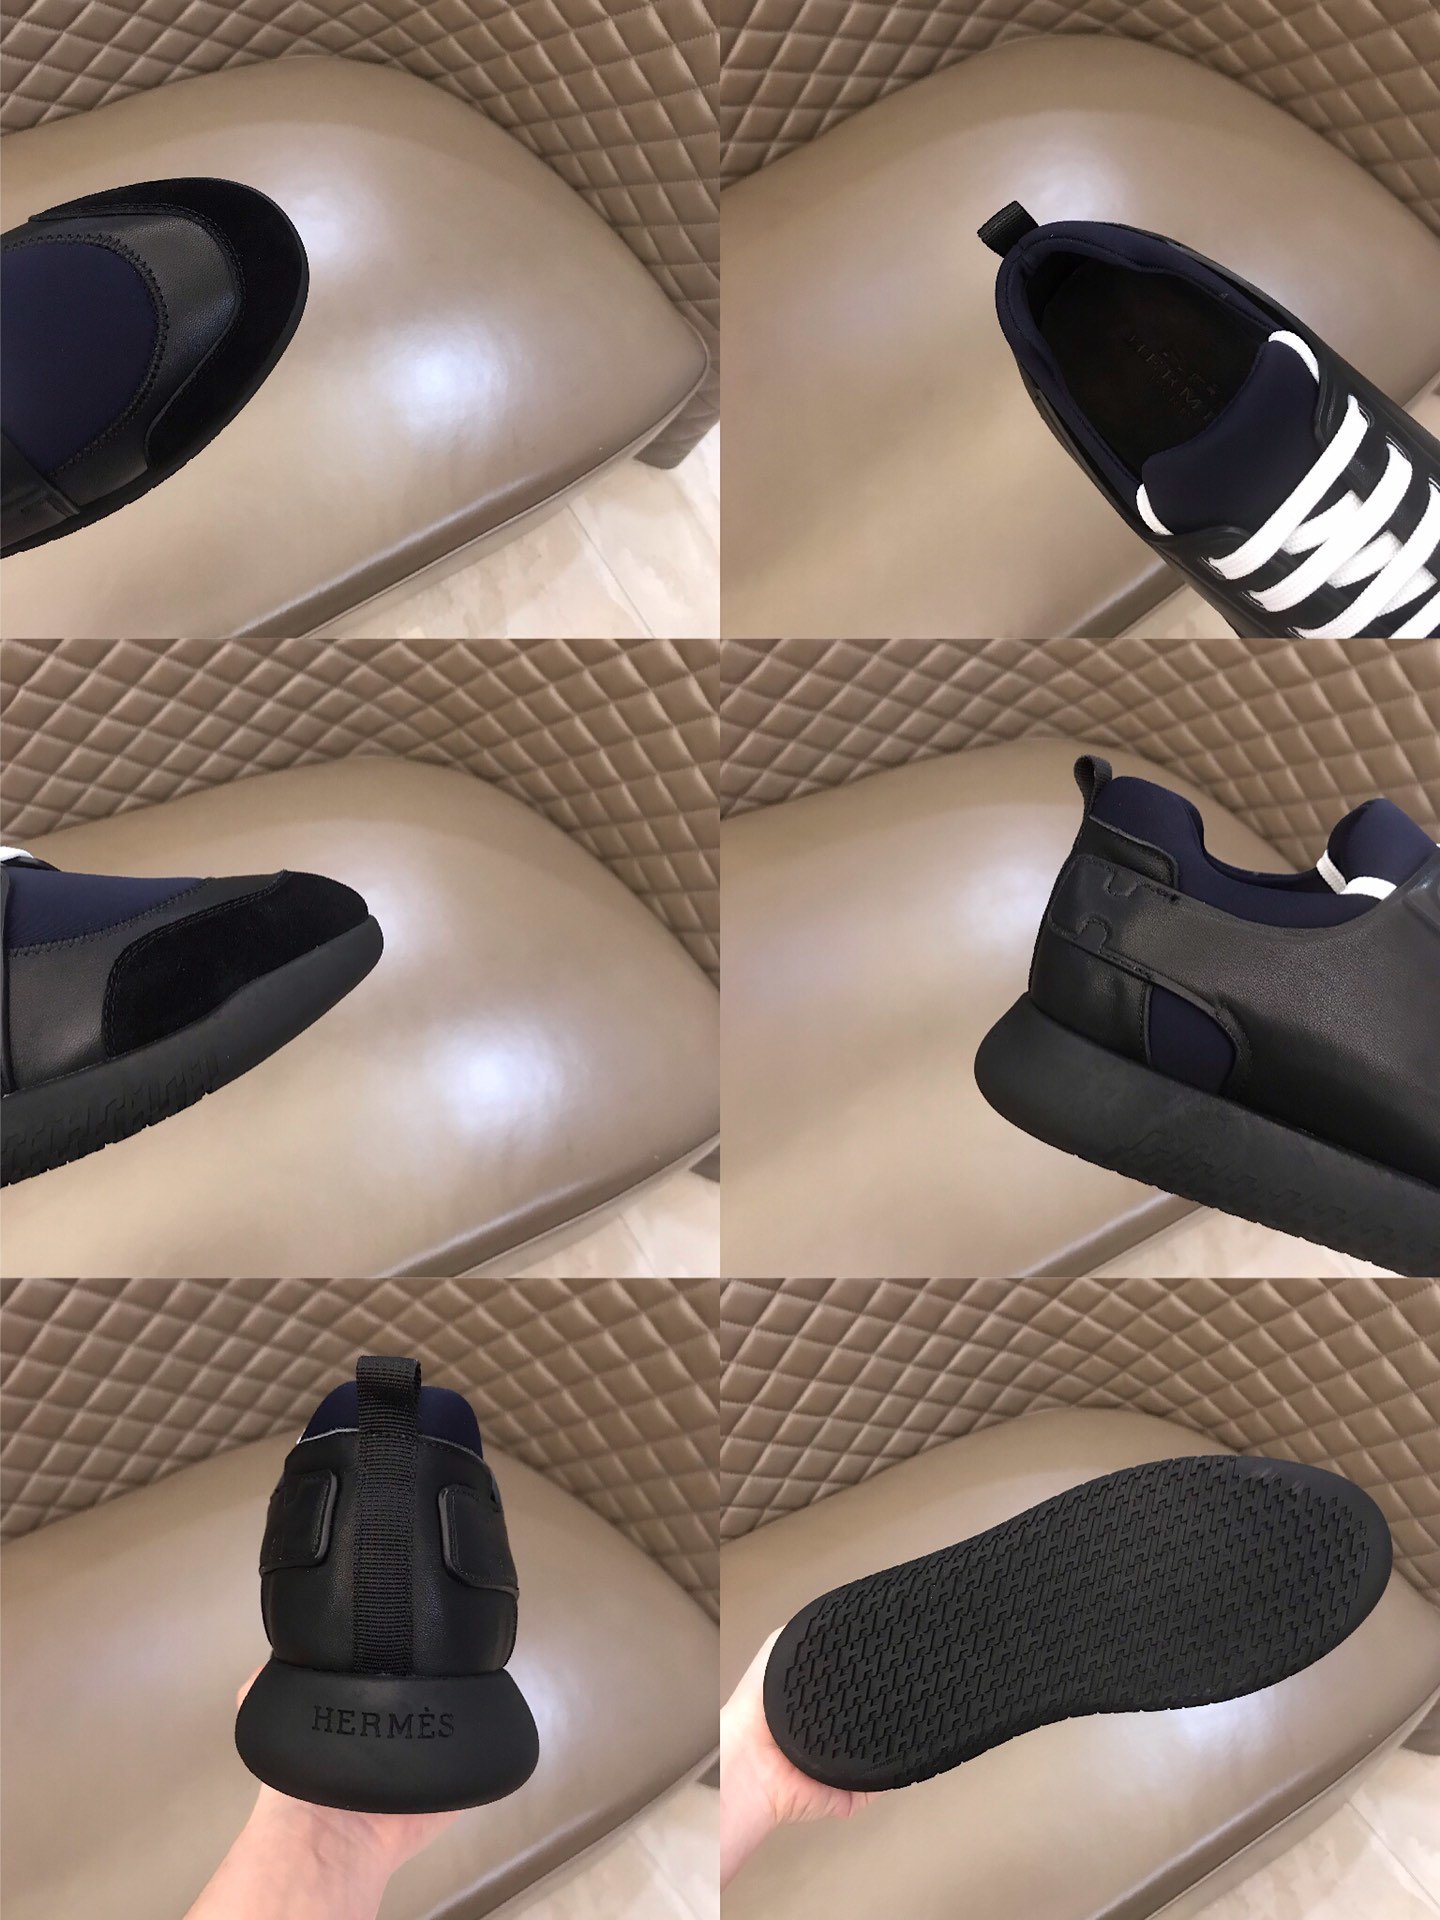 Hermes High Quality Sneakers Black and Dark blue tongue with Black sole MS021092